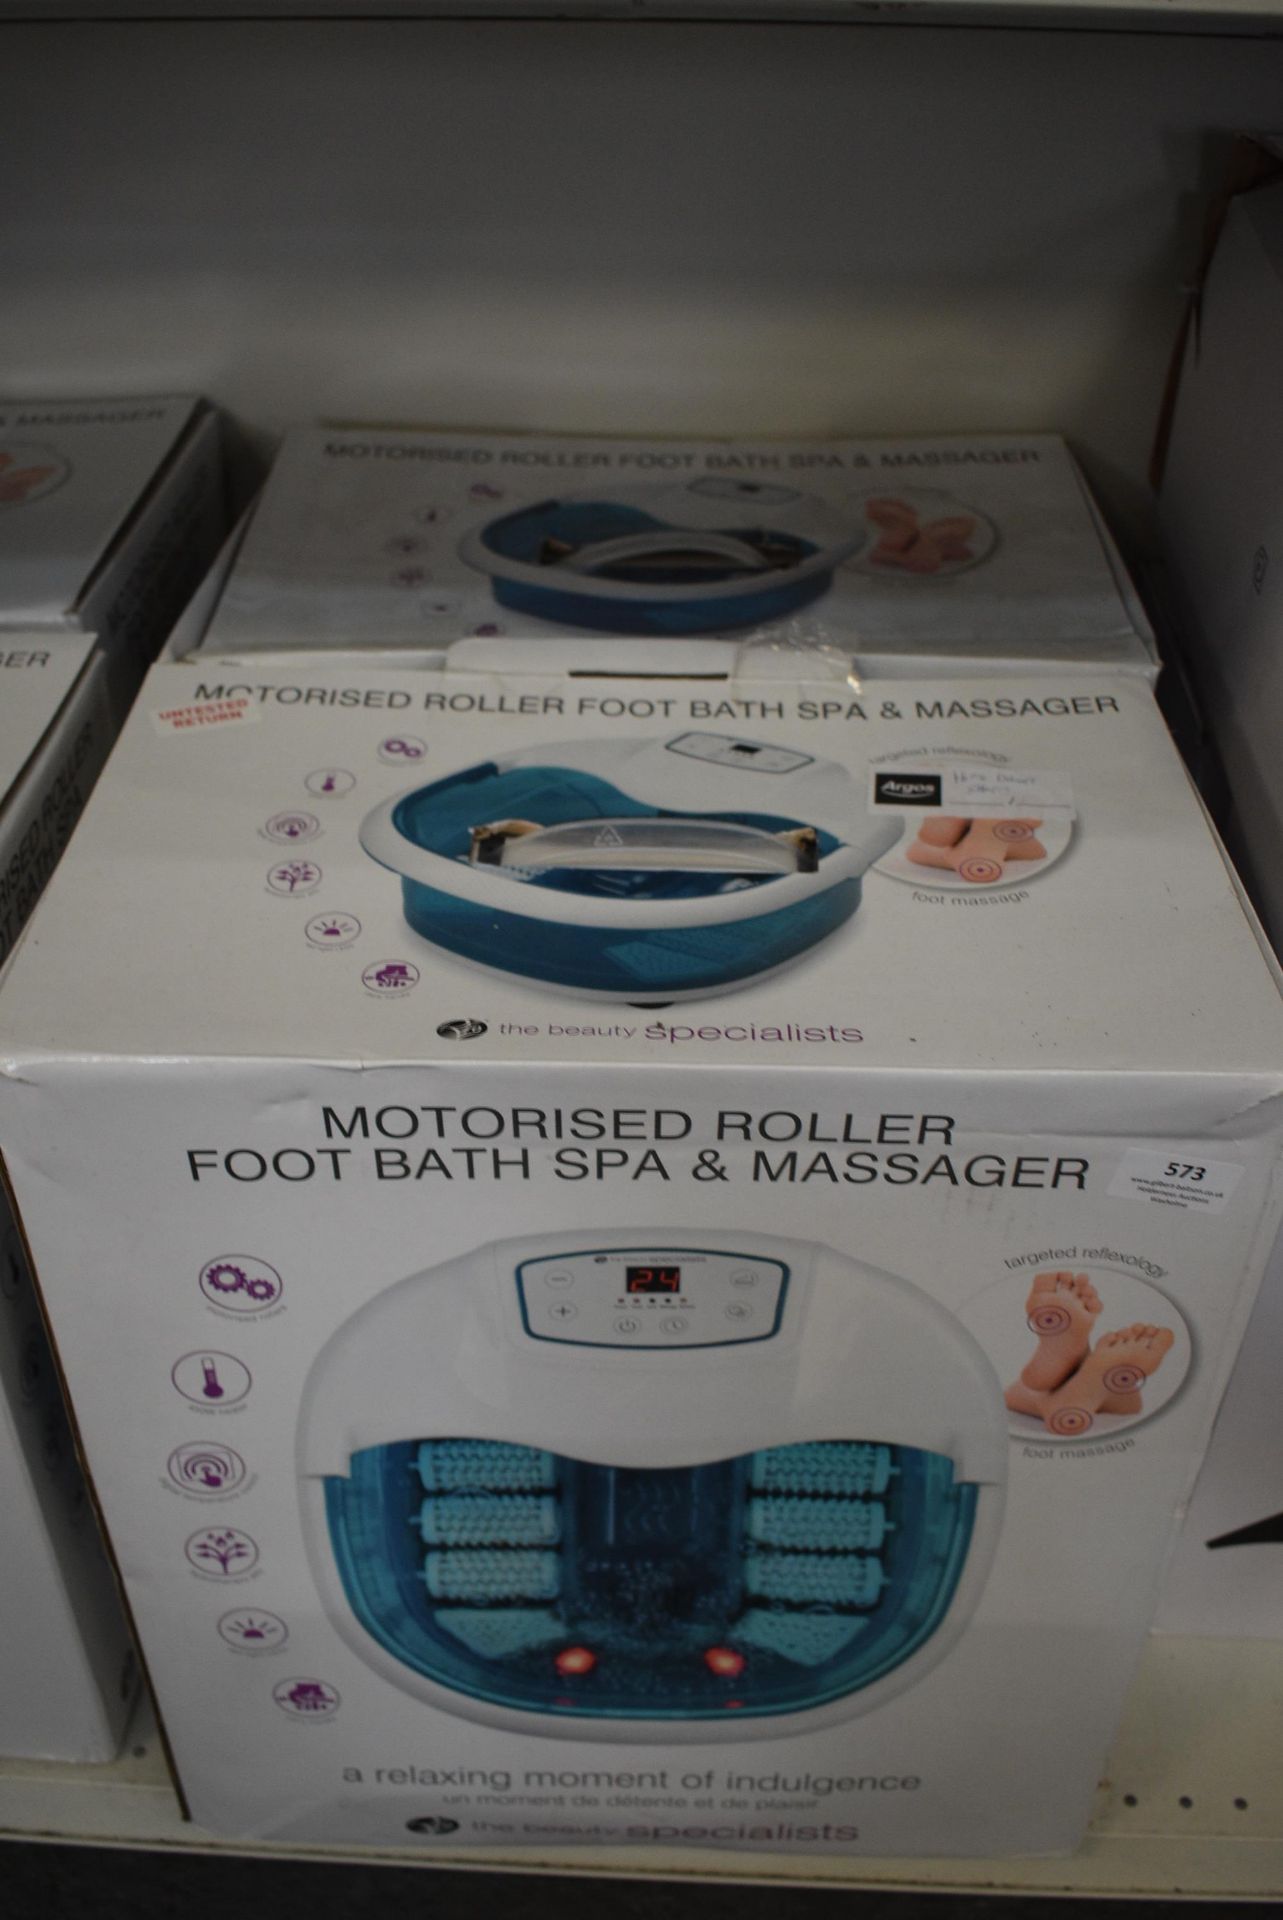 Two Motorised Roller Foot Bath Spa & Massagers - Image 2 of 2